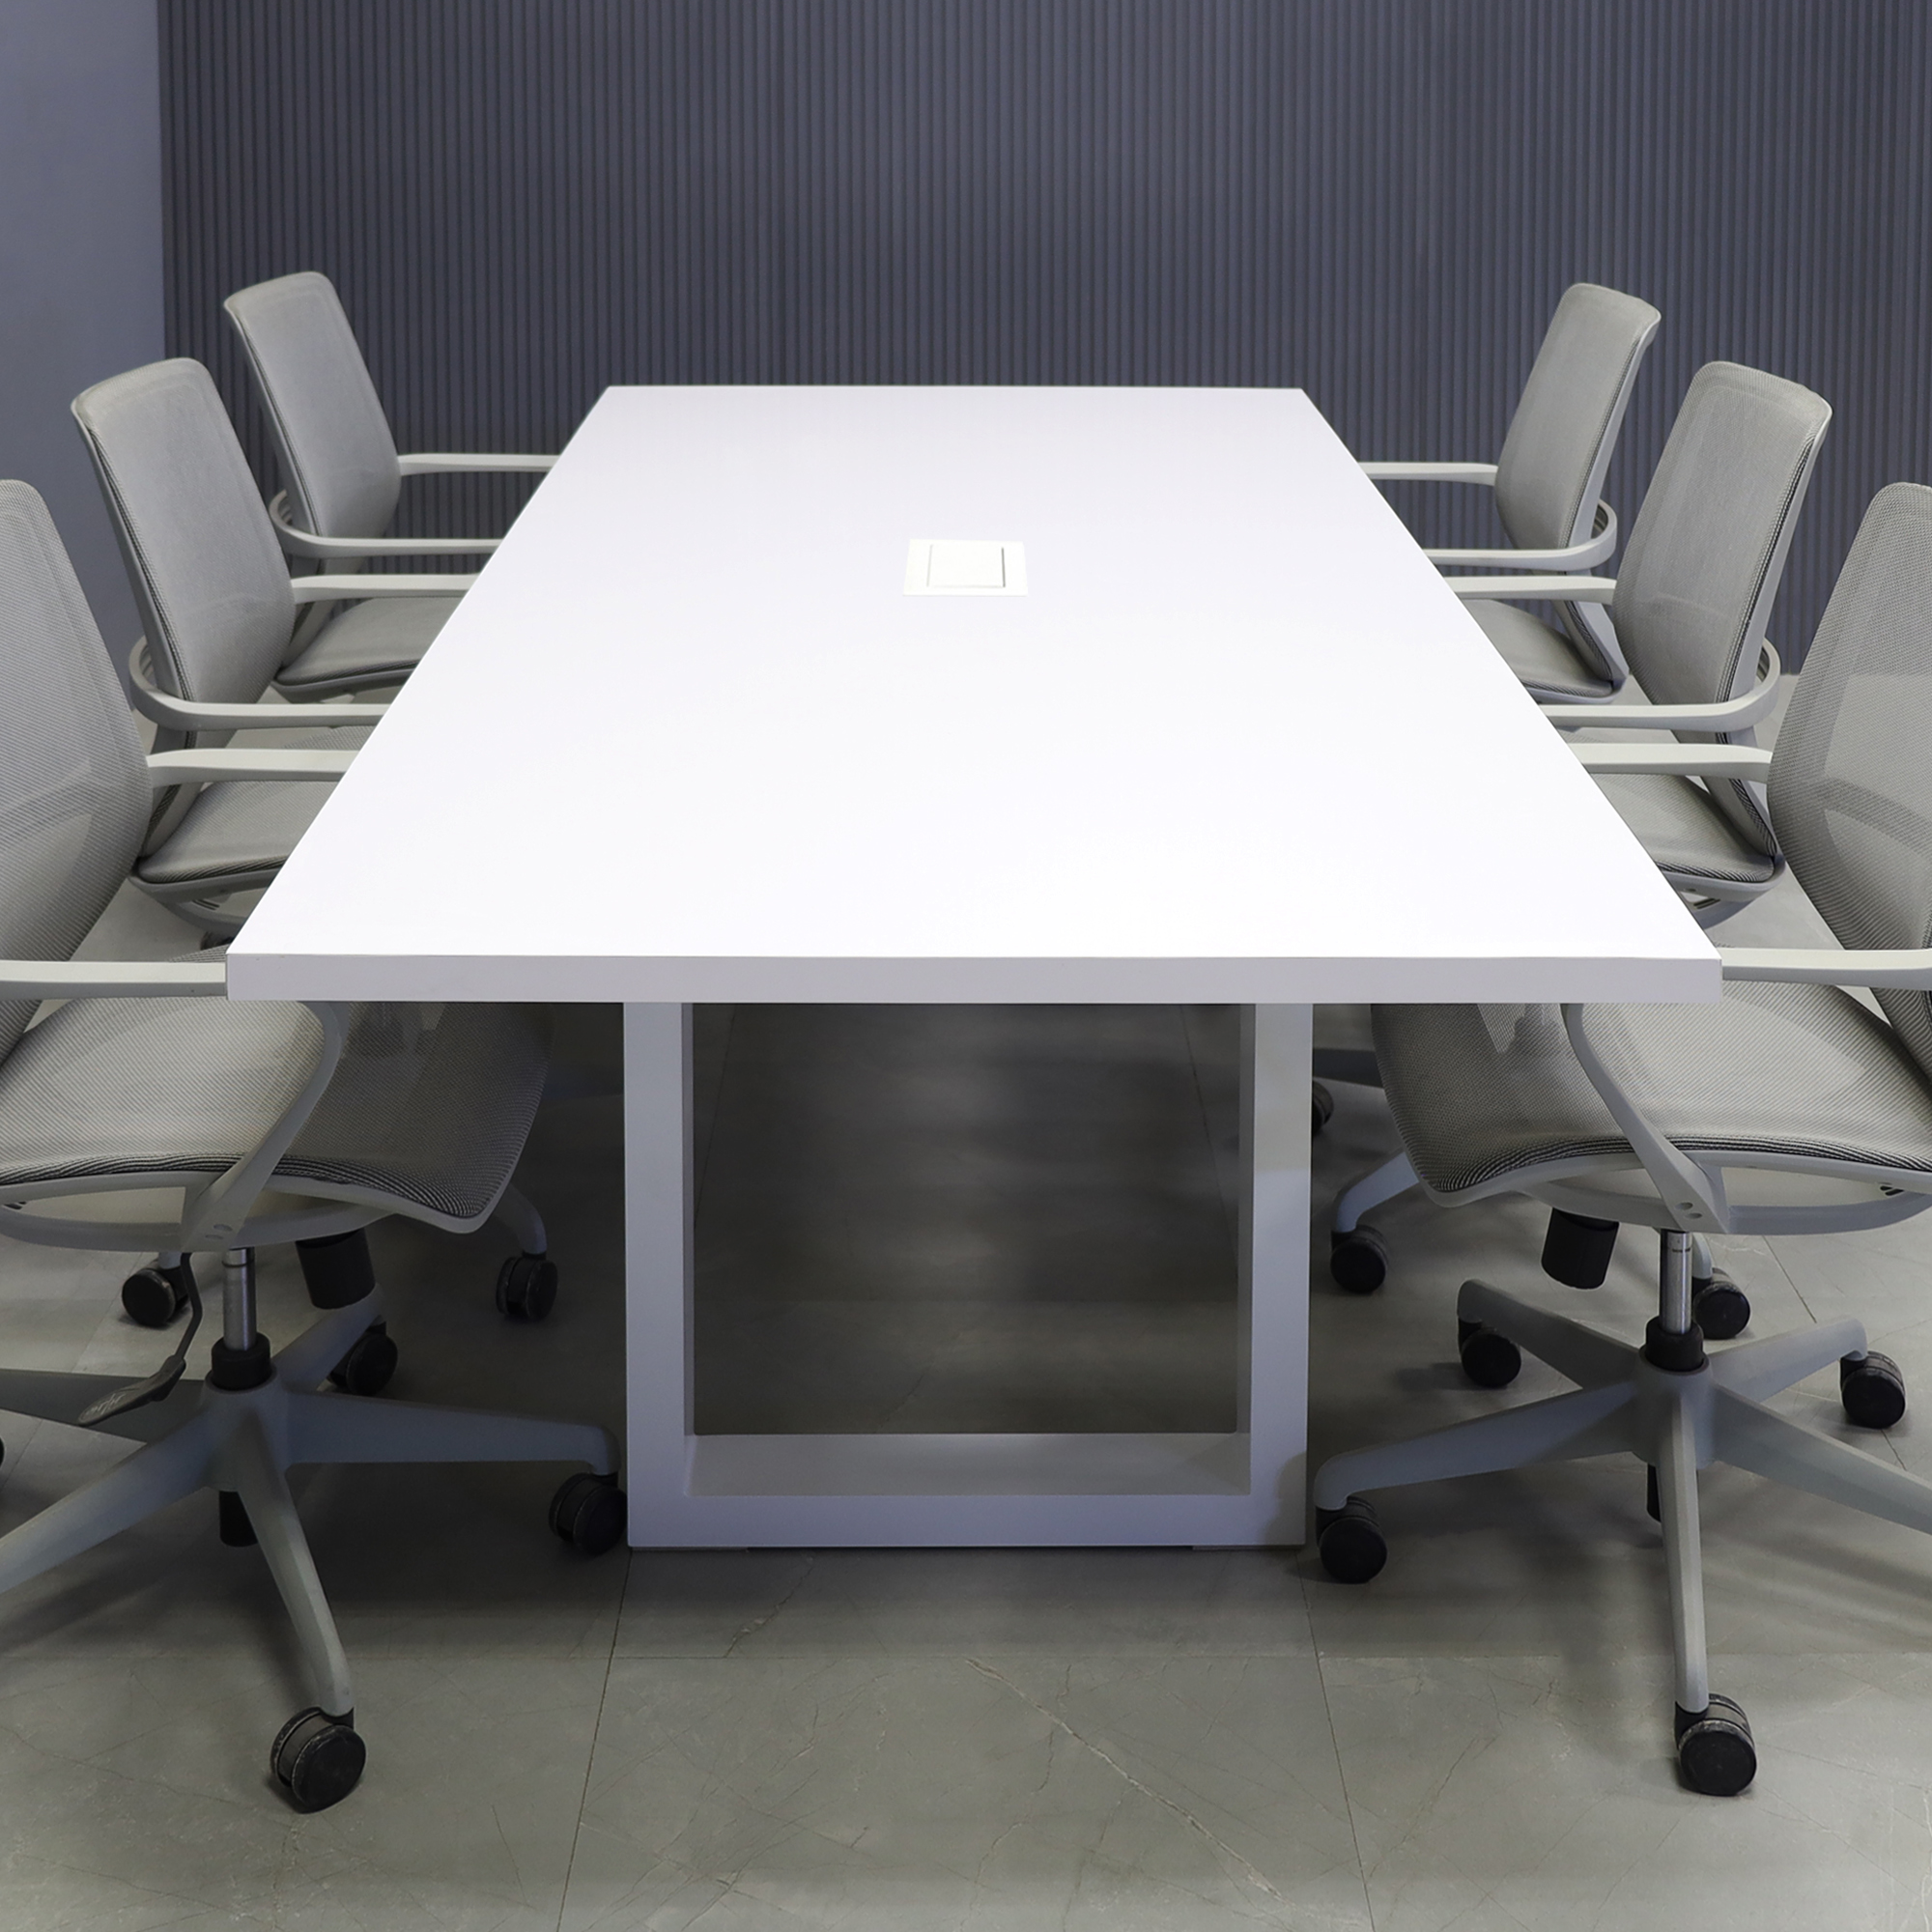 90-inch Newton Rectangular Conference Table in white gloss laminate top and white metal u base, with white MX2 powerbox, shown here.